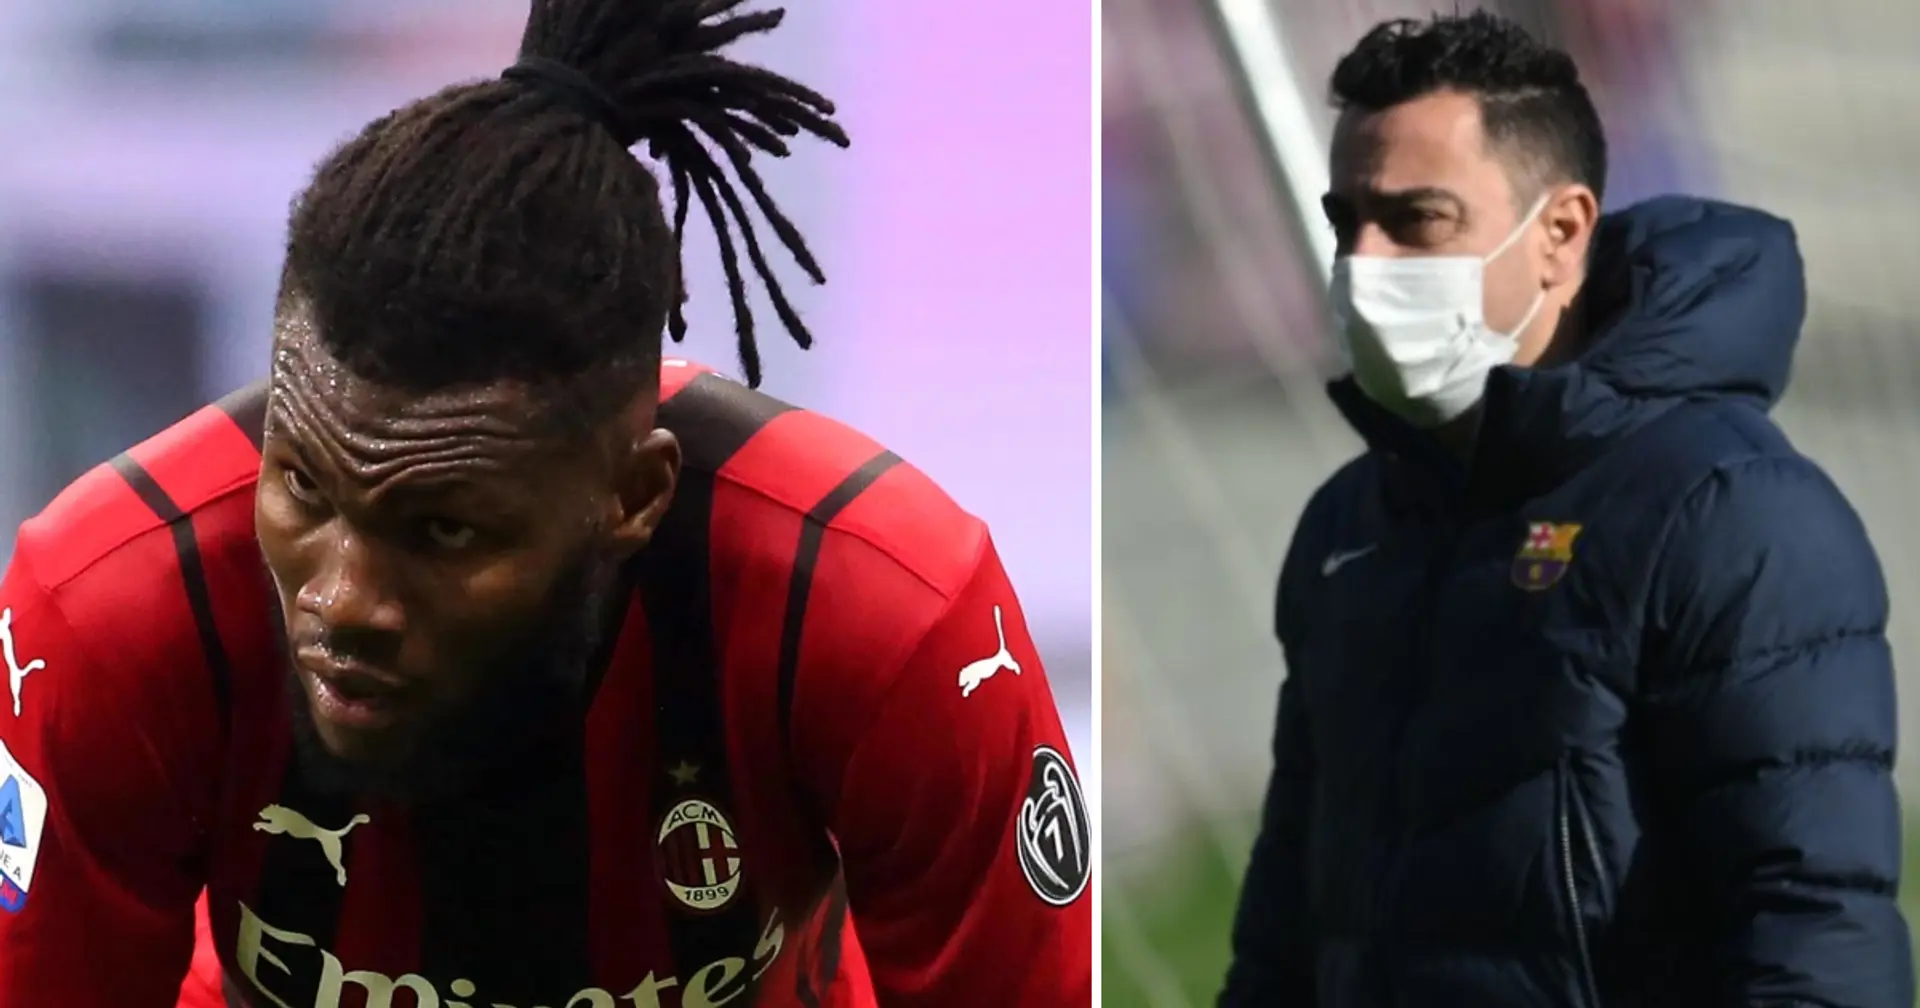 3 reasons why signing Kessie makes sense, 2 reasons why it doesn't